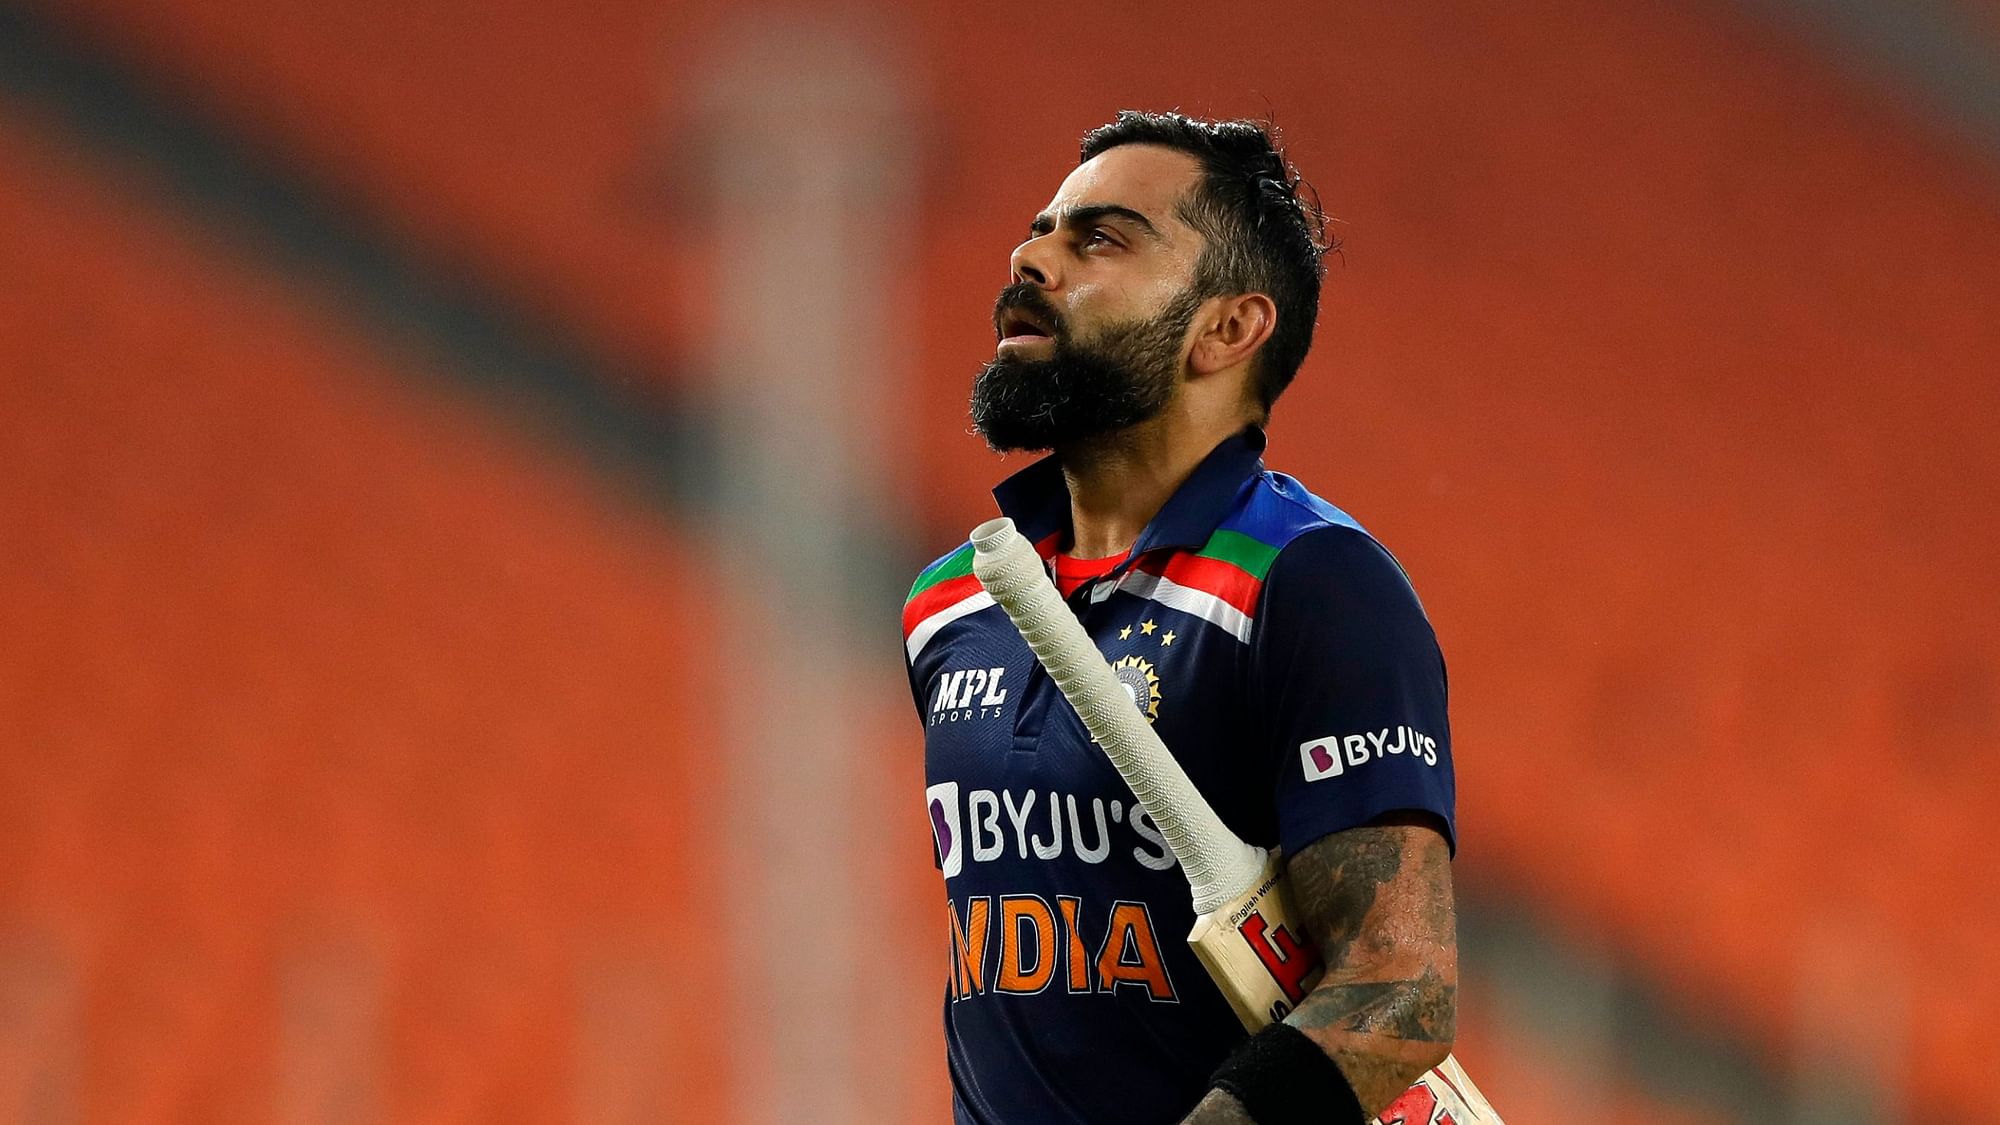 Virat Kohli has said he plans to continue opening for India.